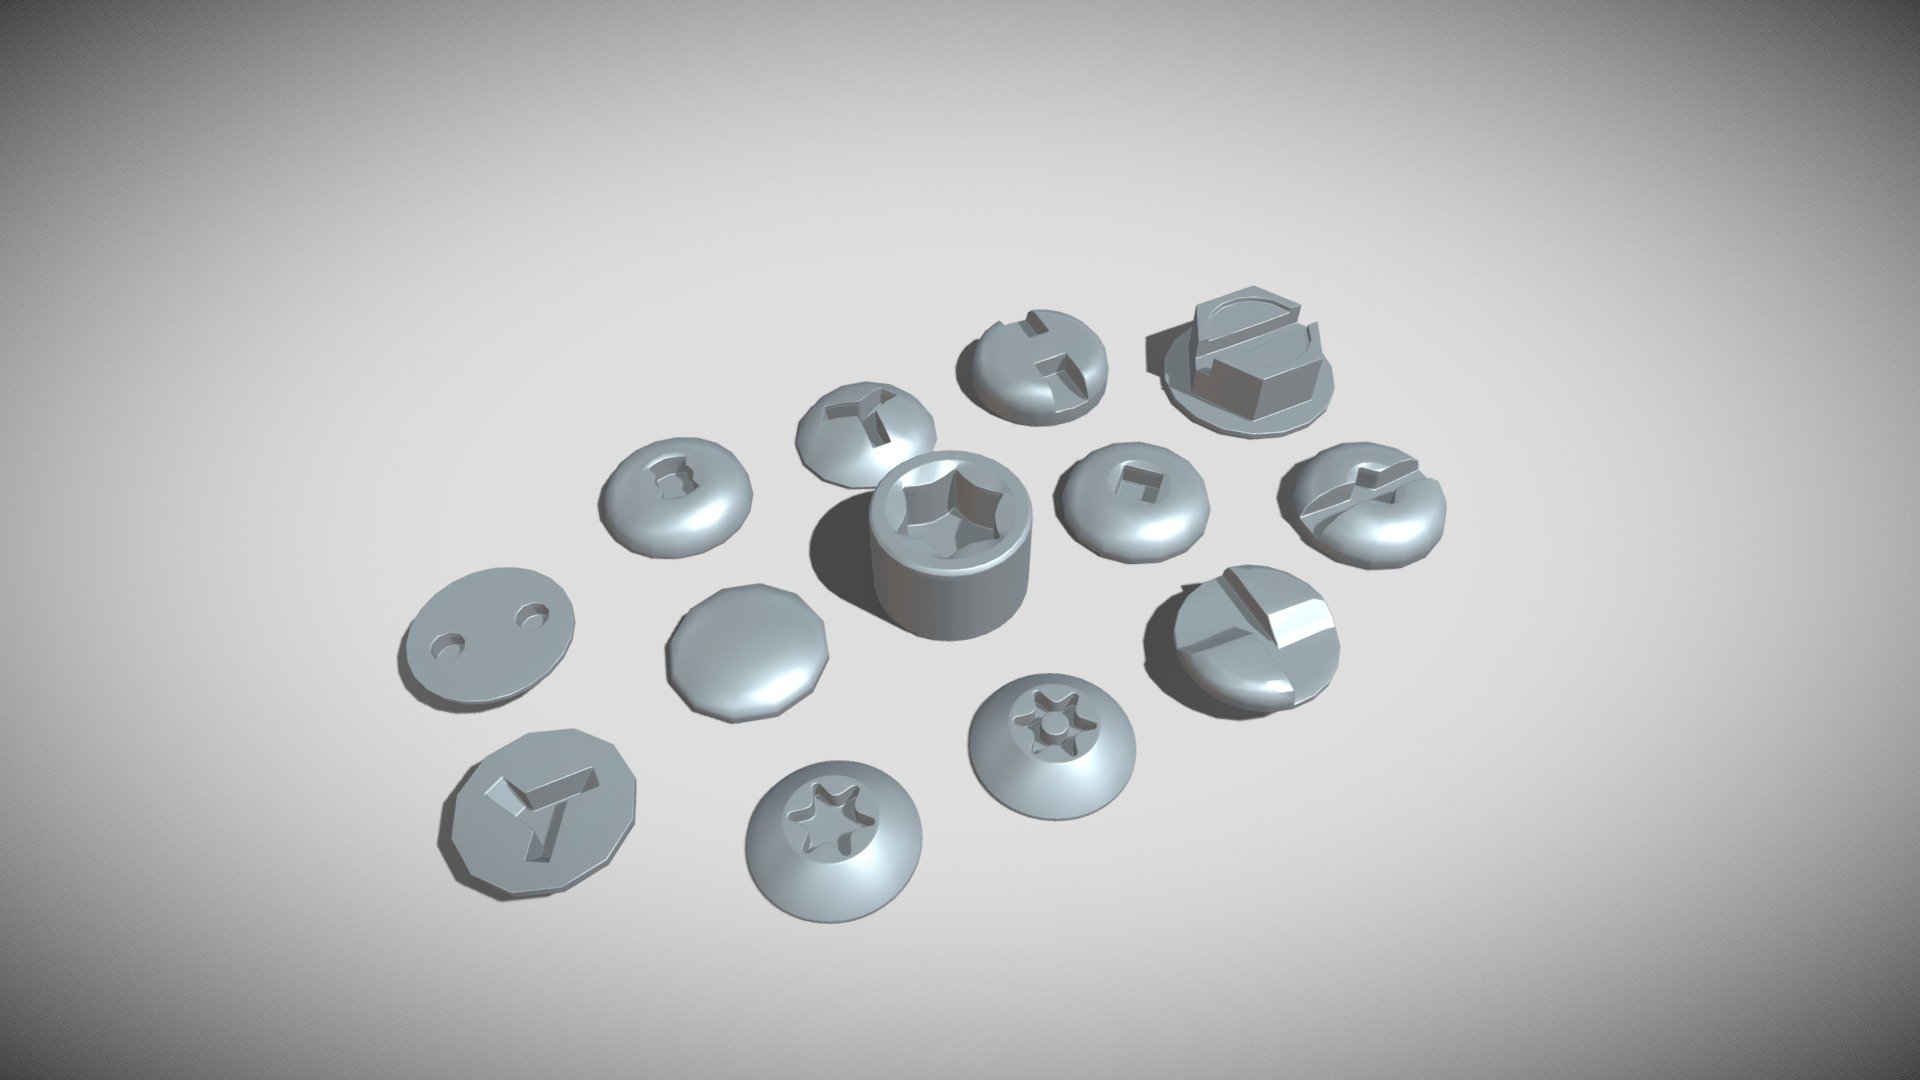 This pack contains 13 detailed models of different types of screw heads, modeled in Cinema 4D.The models were created using approximate real world dimensions.

An additional file has been provided containing the original Cinema 4D project files, textures and other 3d export files such as 3ds, fbx and obj 3d model